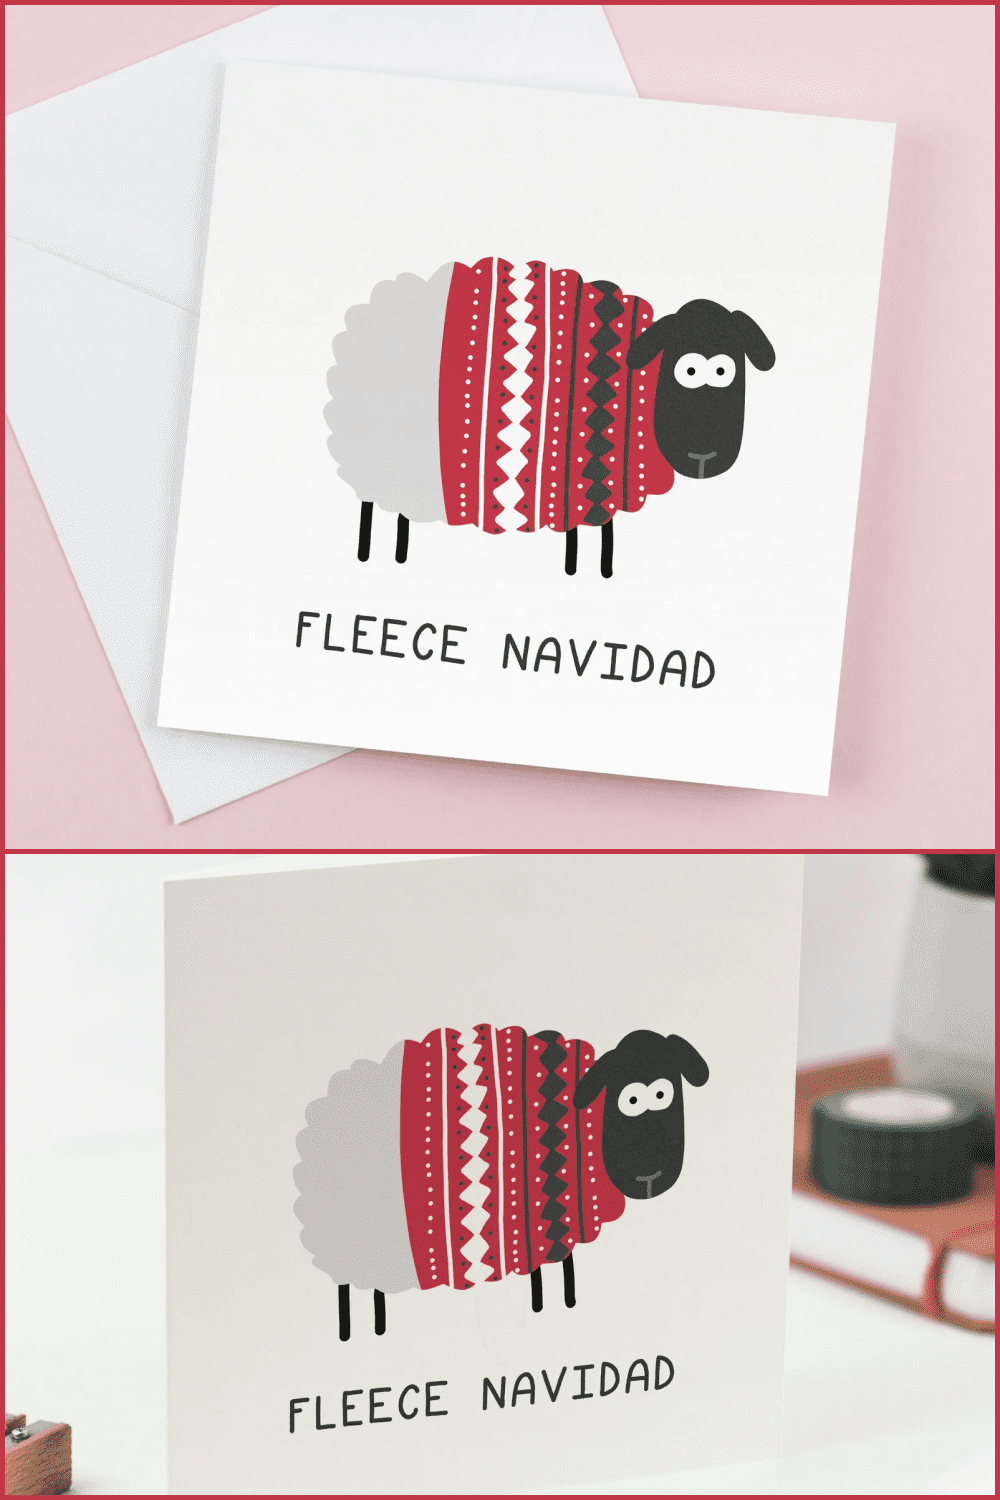 Card with a cute lamb in a knitted sweater